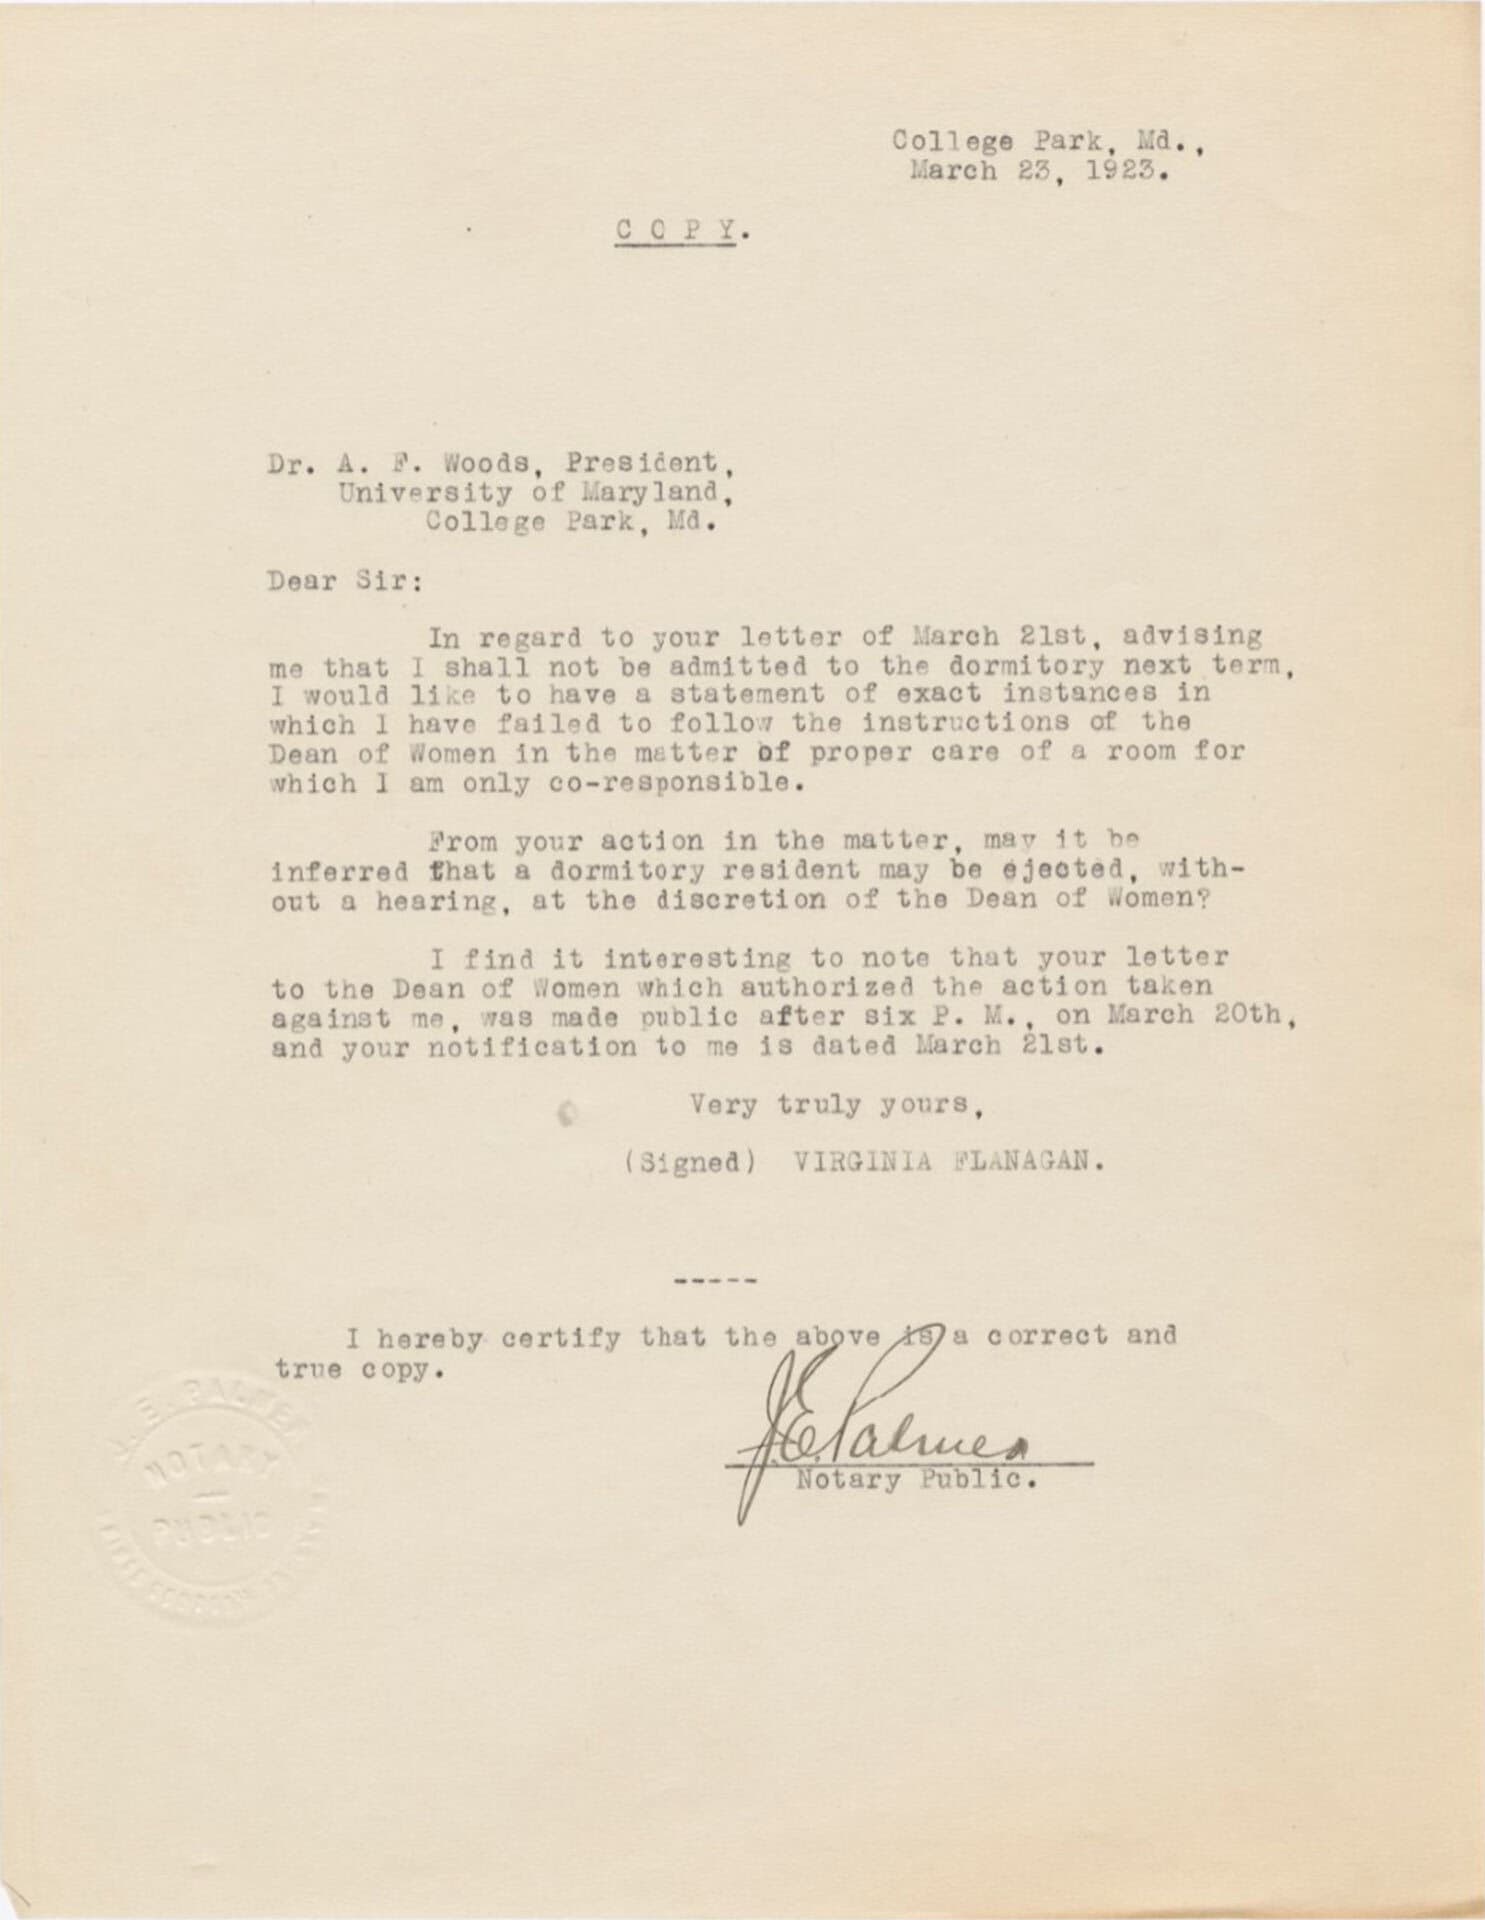 A type-written letter from 1932